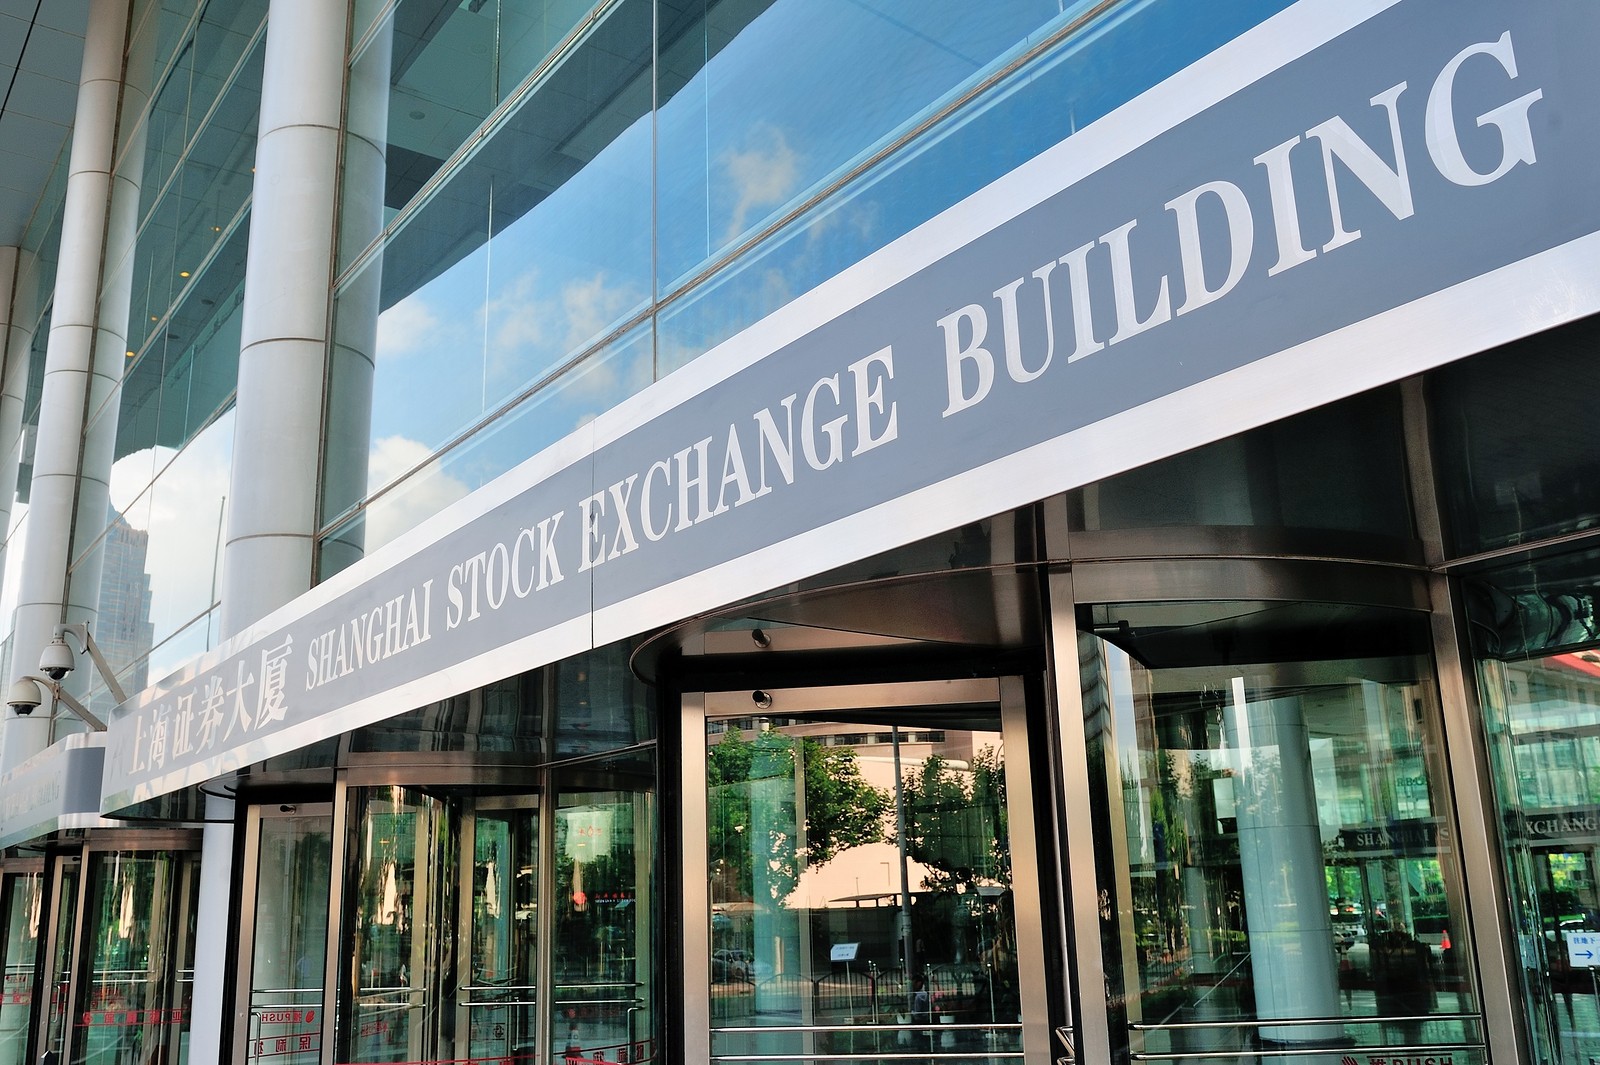 Mainland China’s stock exchanges release guidelines for sustainability reporting